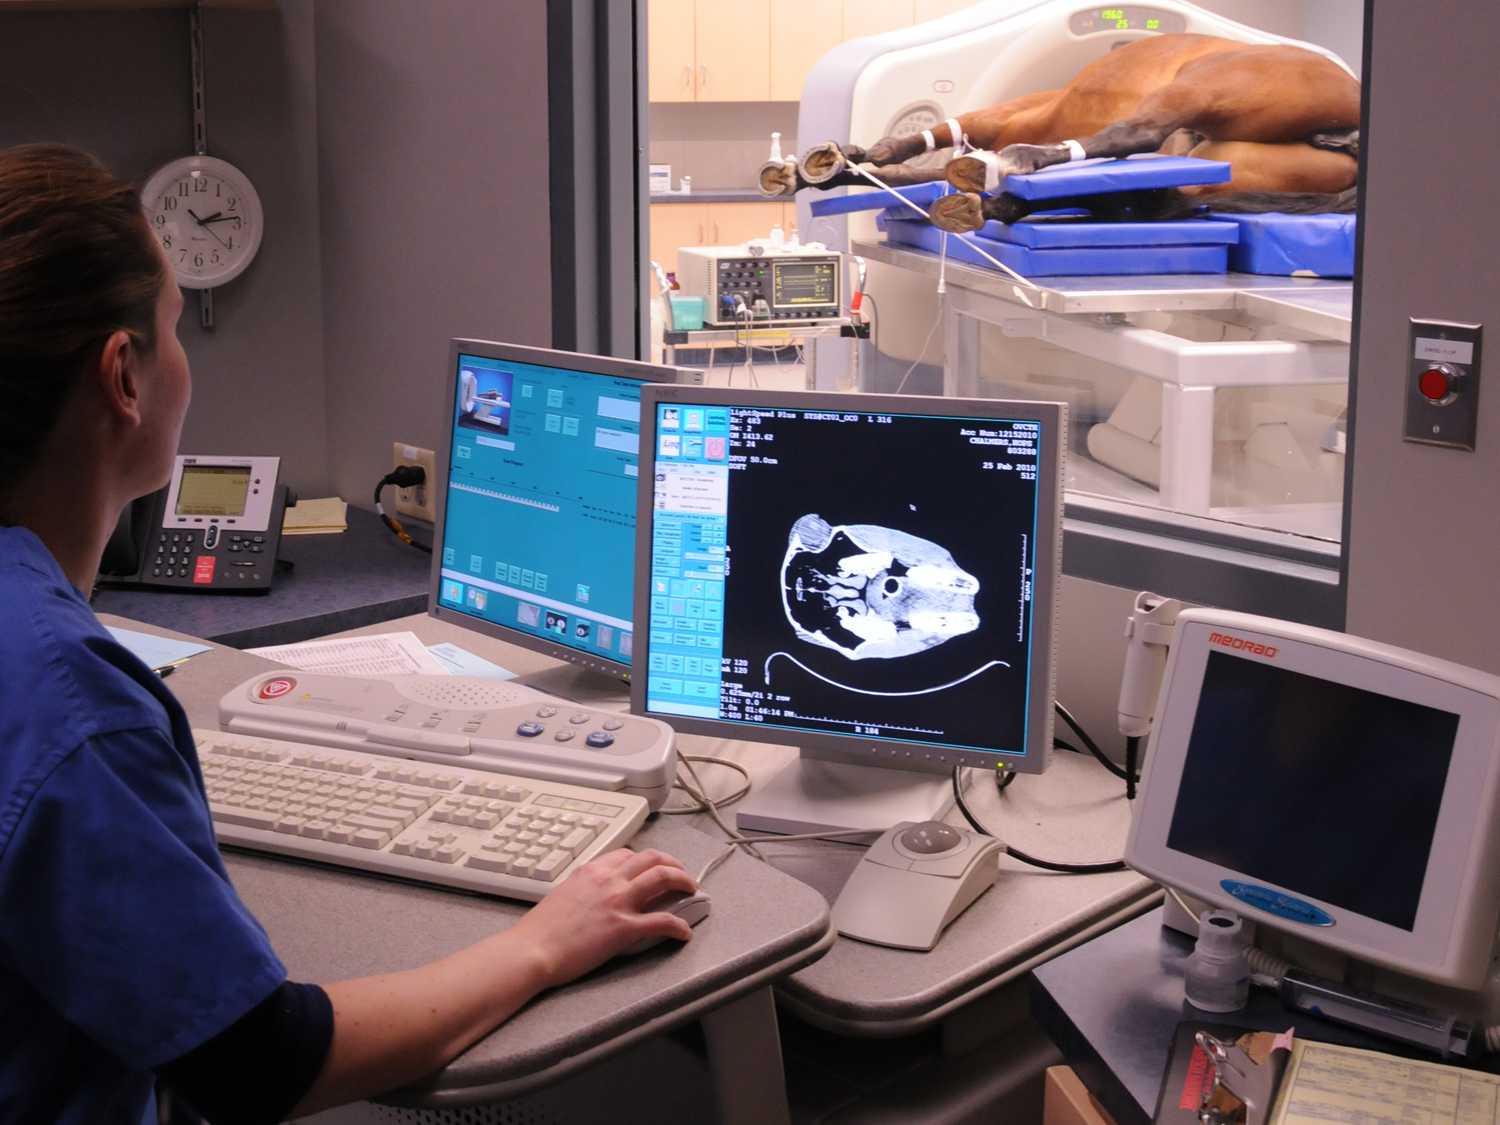 Horse undergoing a CT scan with a Vet in the foreground analyzing imagery on a computer